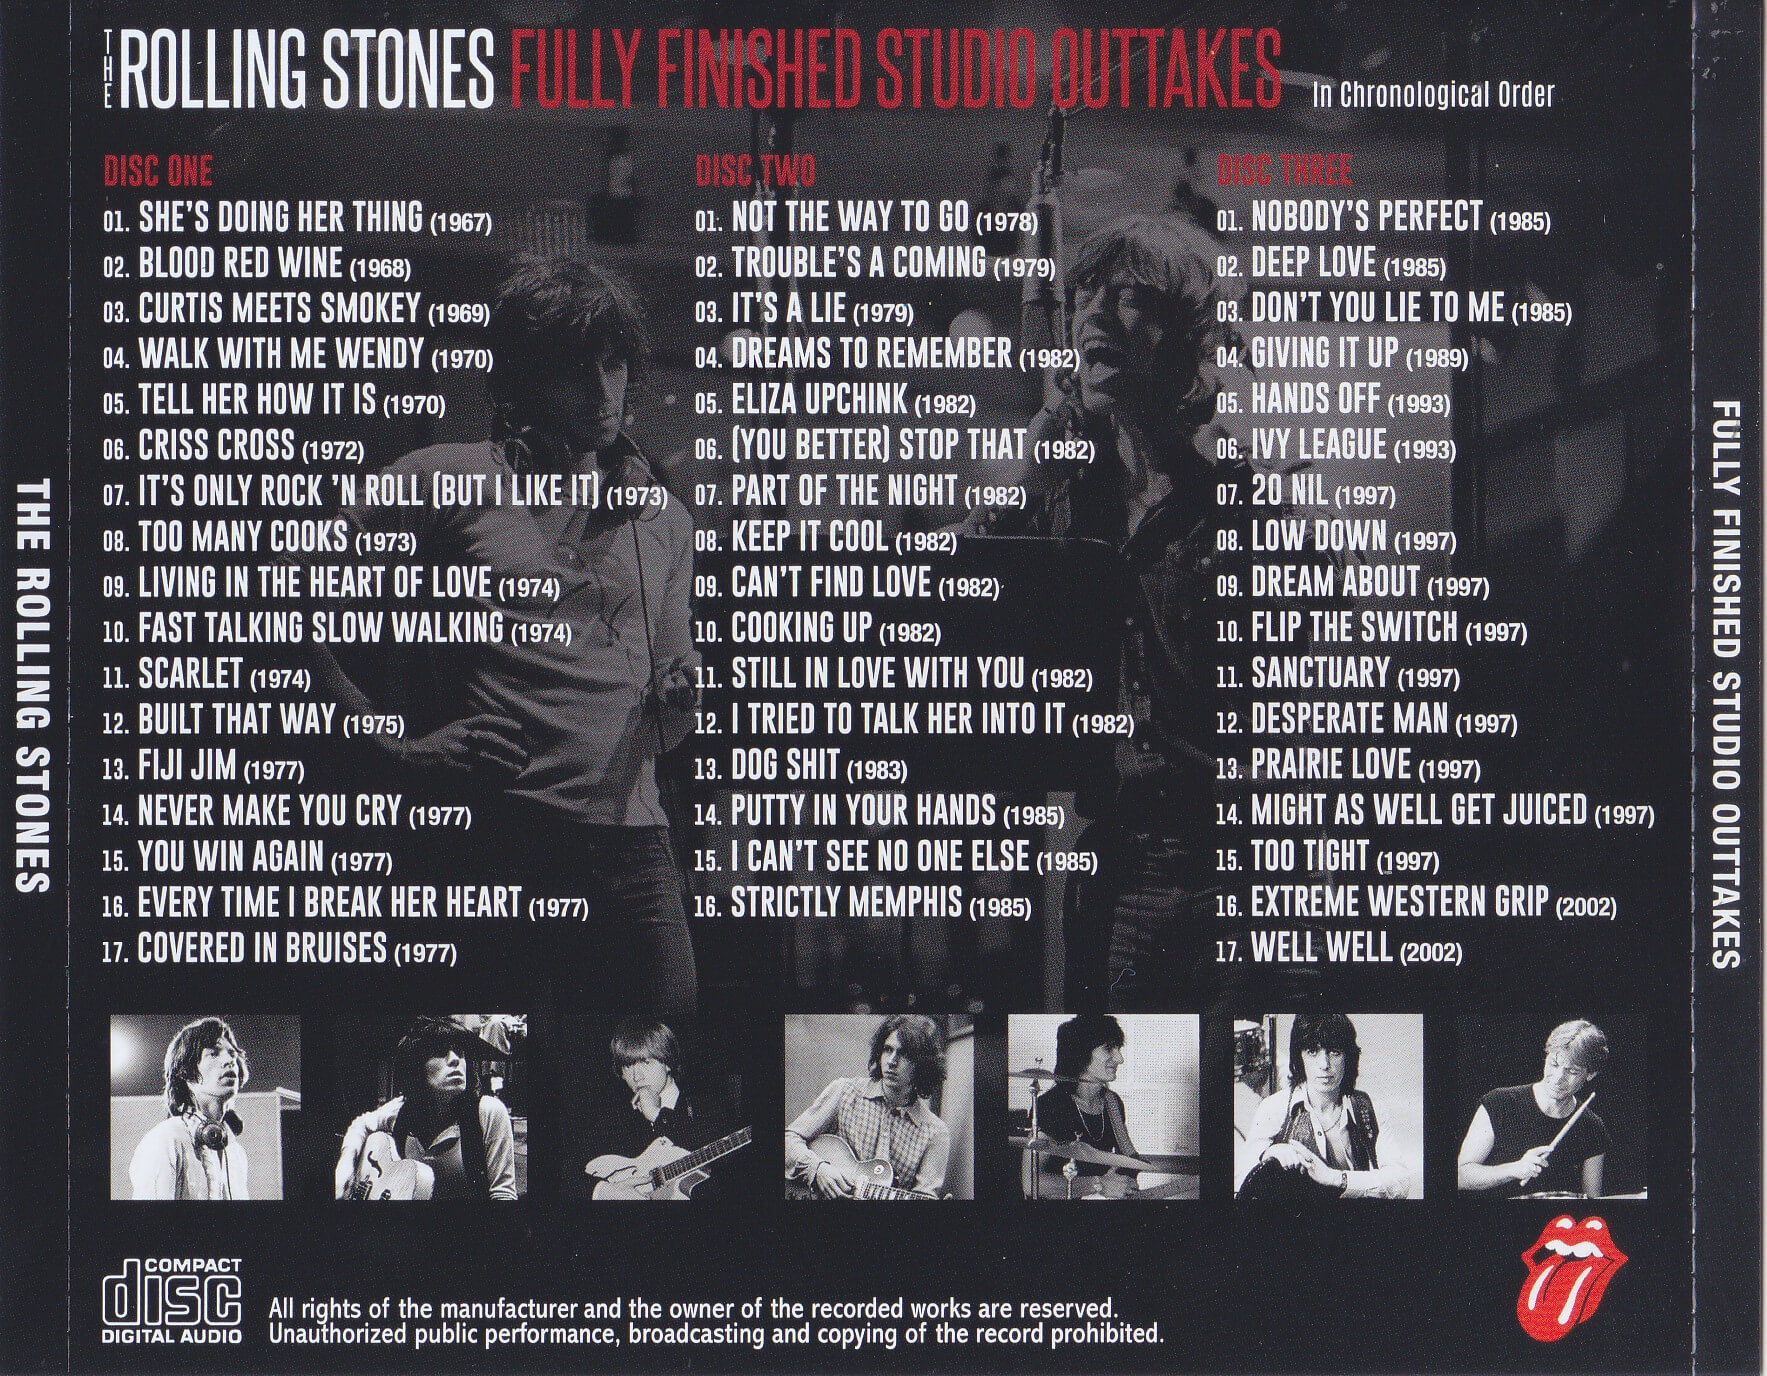 Rolling Stones / Fully Finished Studio Outtakes / 3CD – GiGinJapan